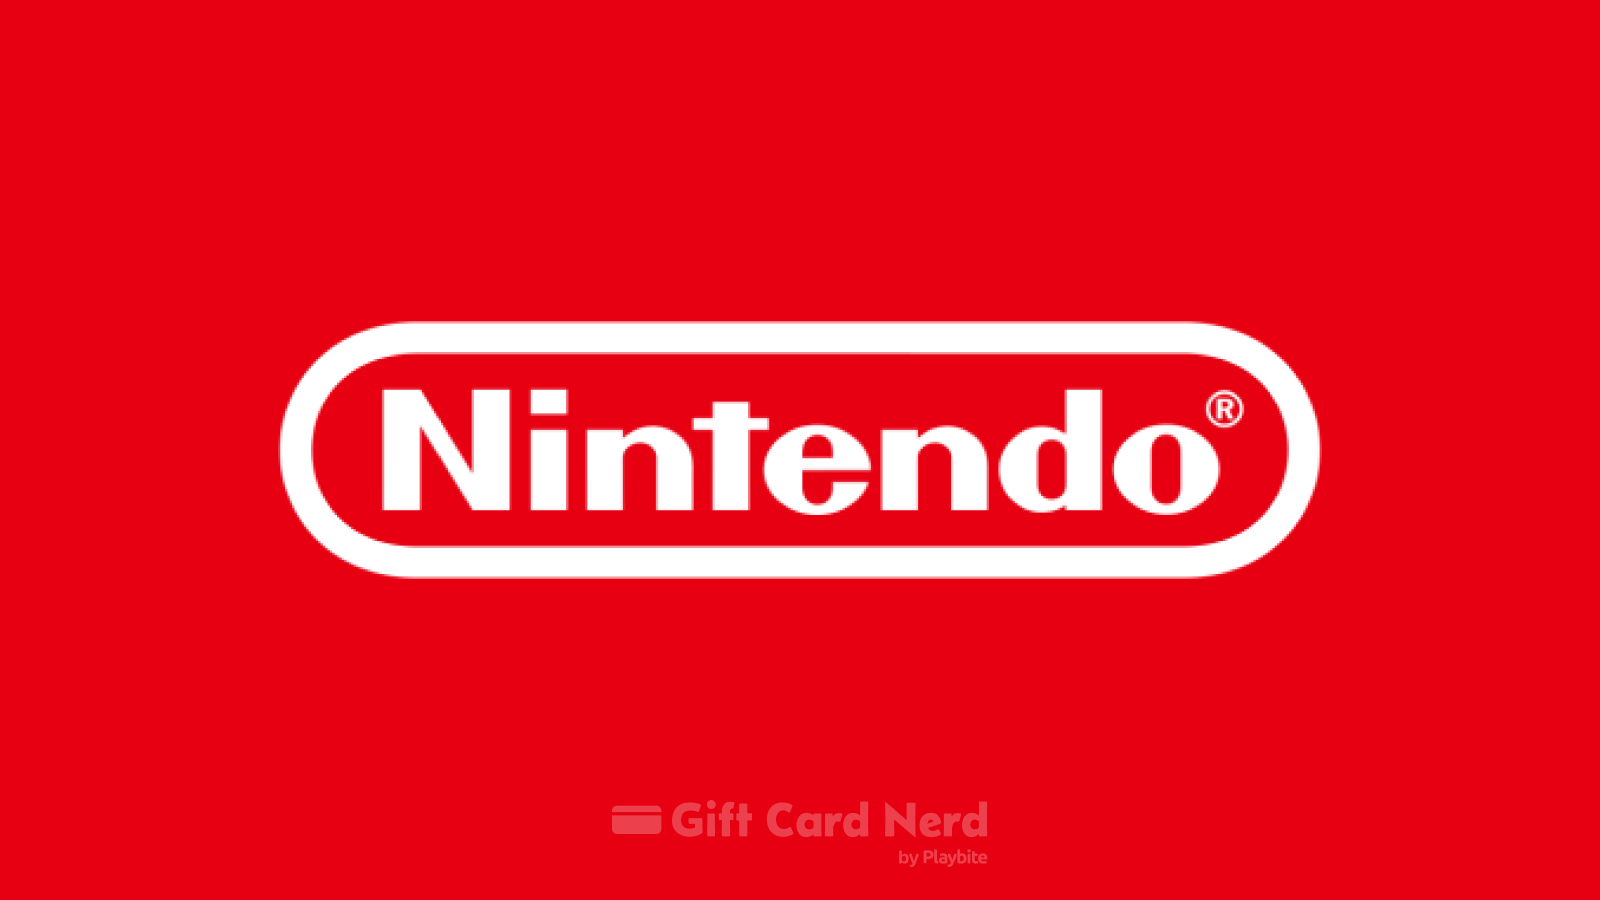 Can I Use a Nintendo Gift Card on the Google Play Store?